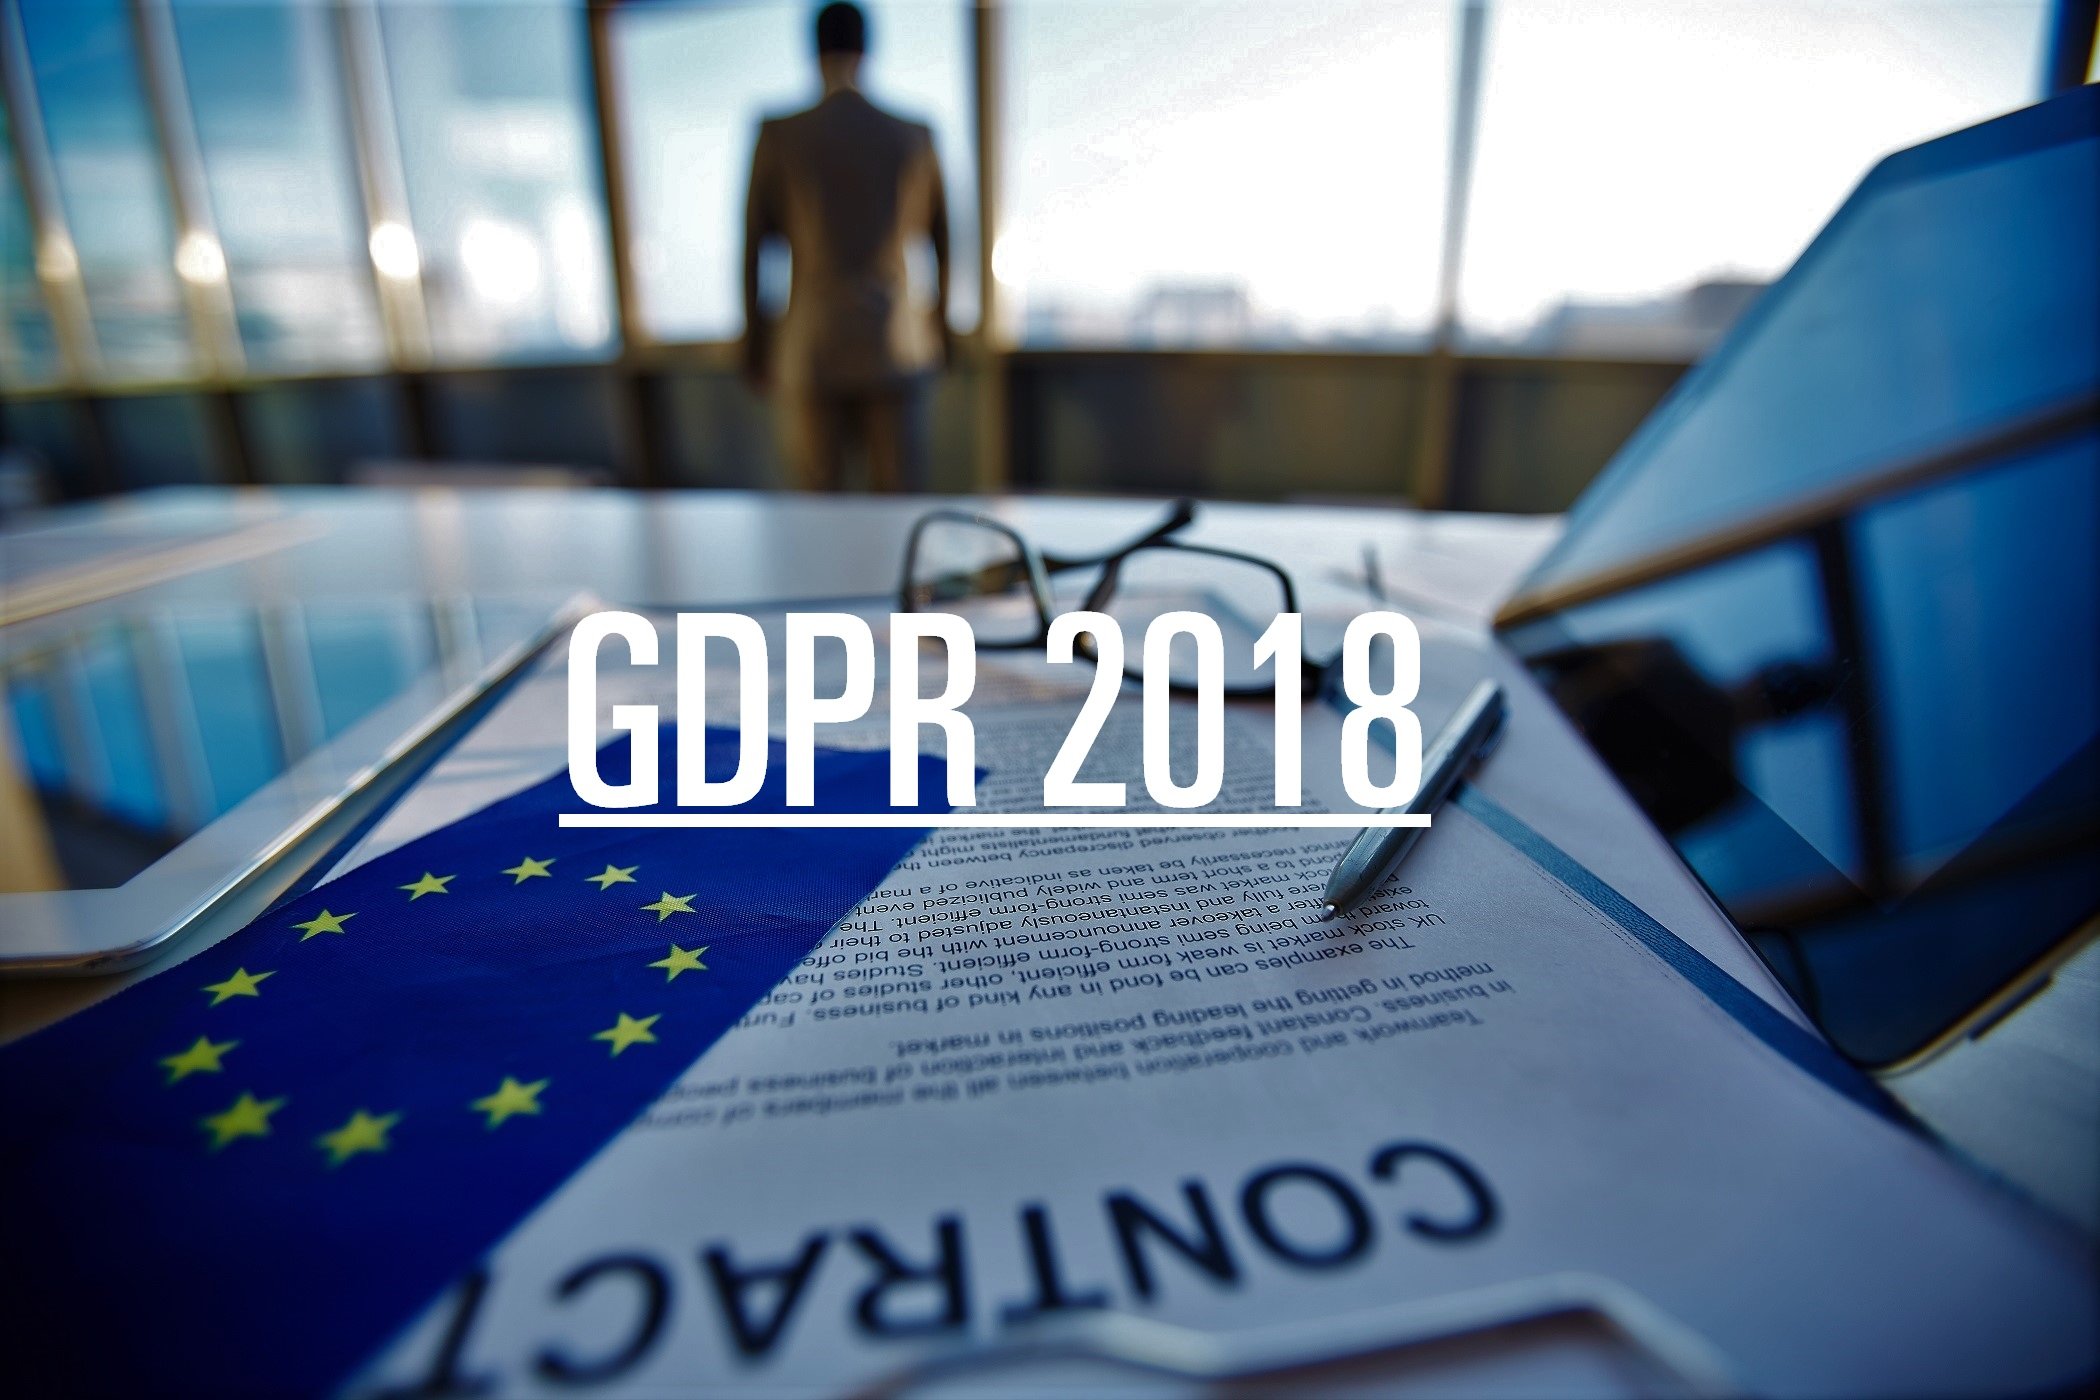 A contract indicating the GDPR implications for marketing that will take effect on May 25th 2018.